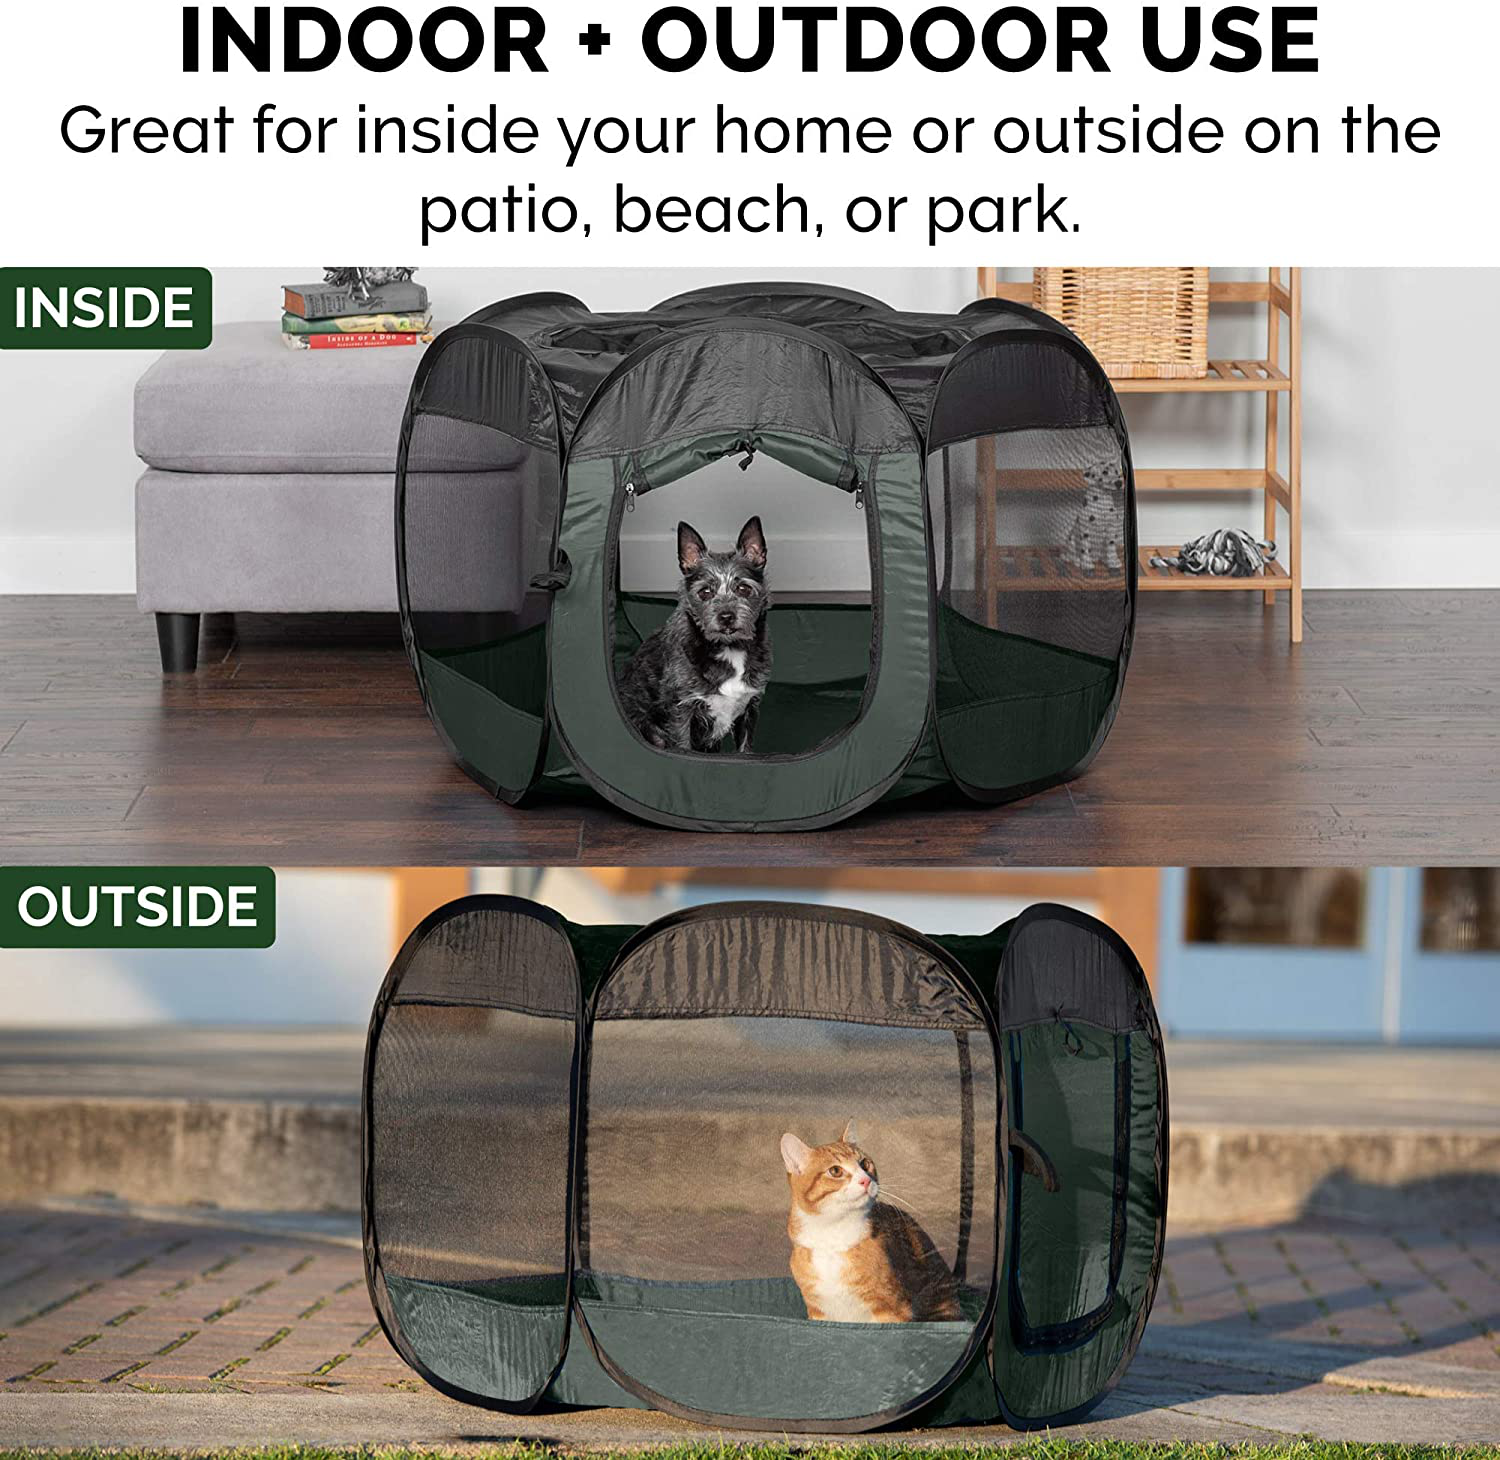 Furhaven Indoor-Outdoor Pop up Exercise Playpen Pet Tent Playground for Small, Medium, and Large Dogs and Cats - Multiple Colors and Sizes